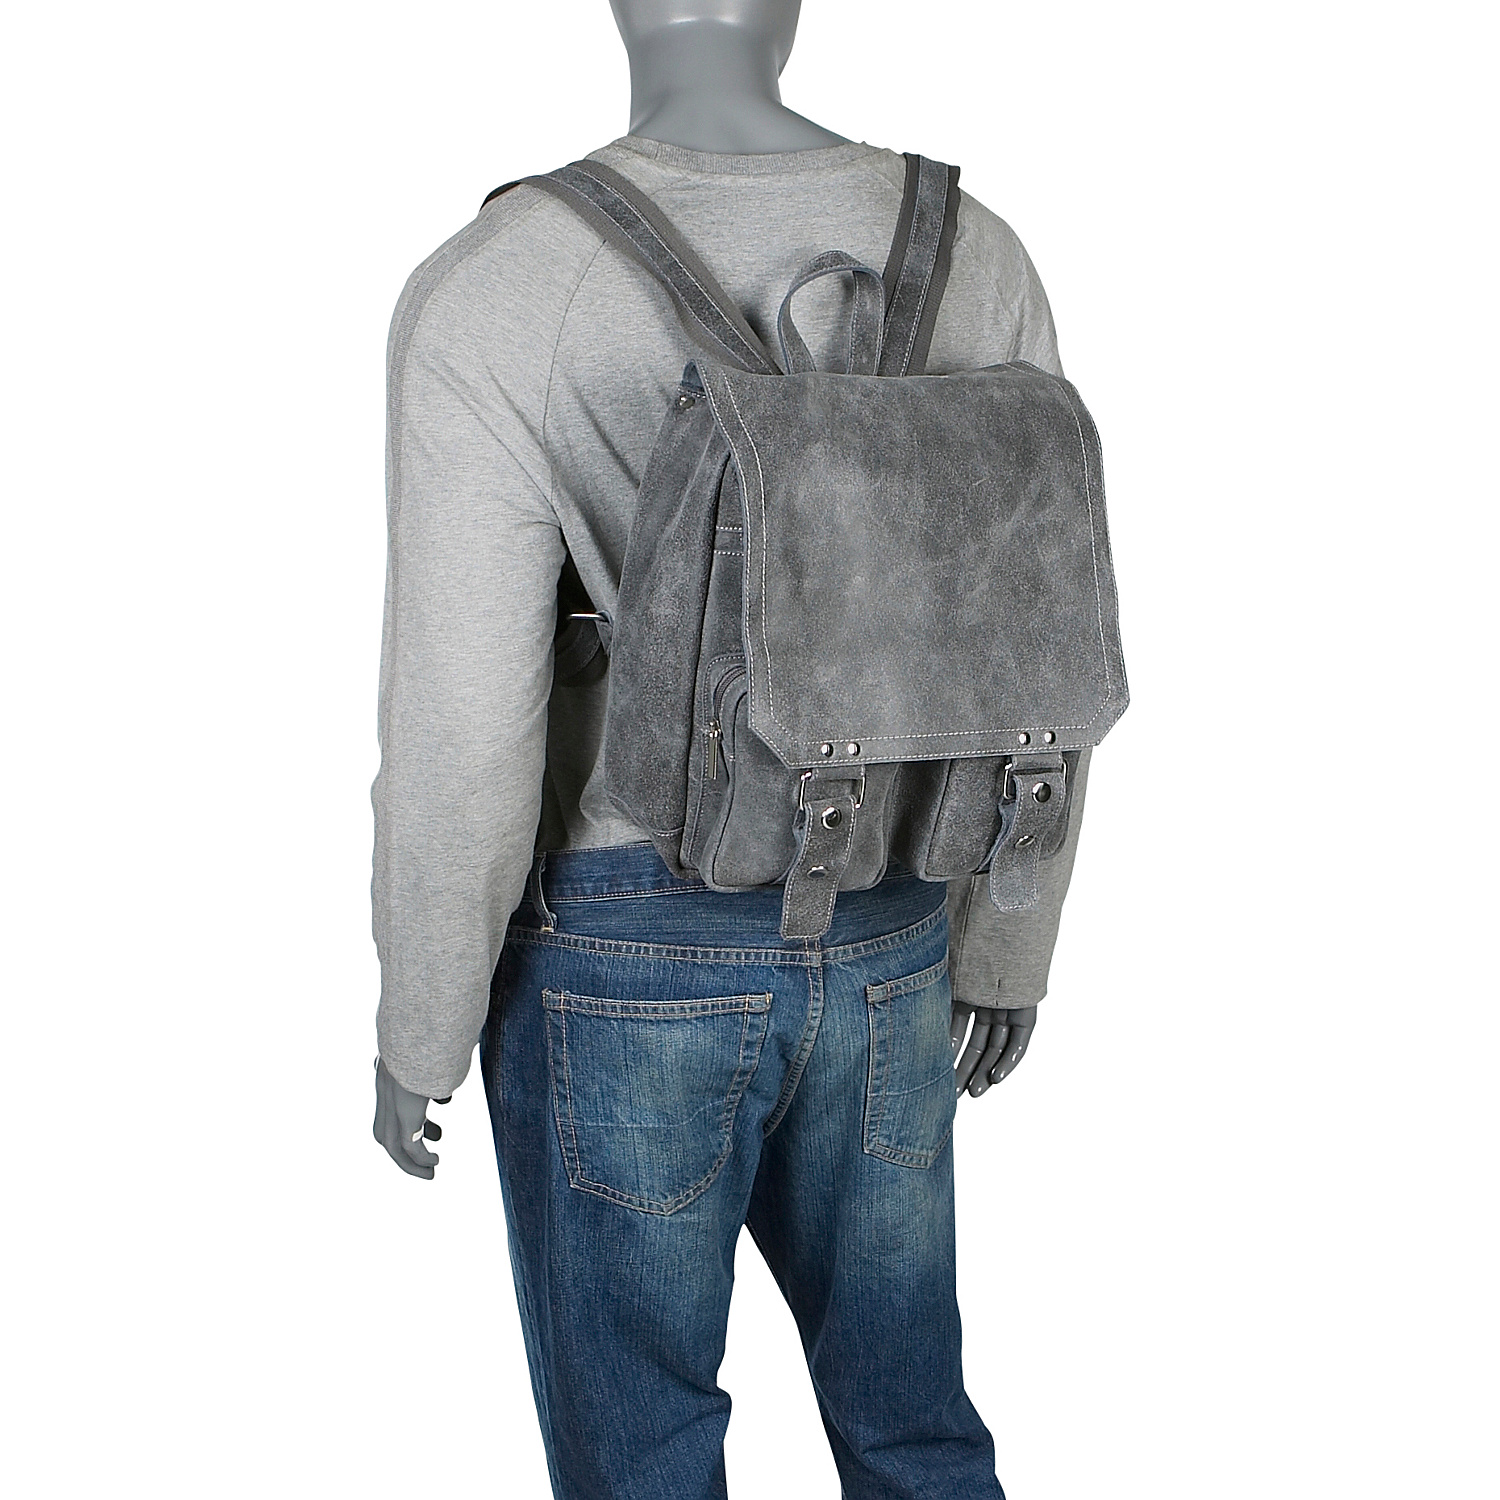 Distressed Leather Laptop Backpack